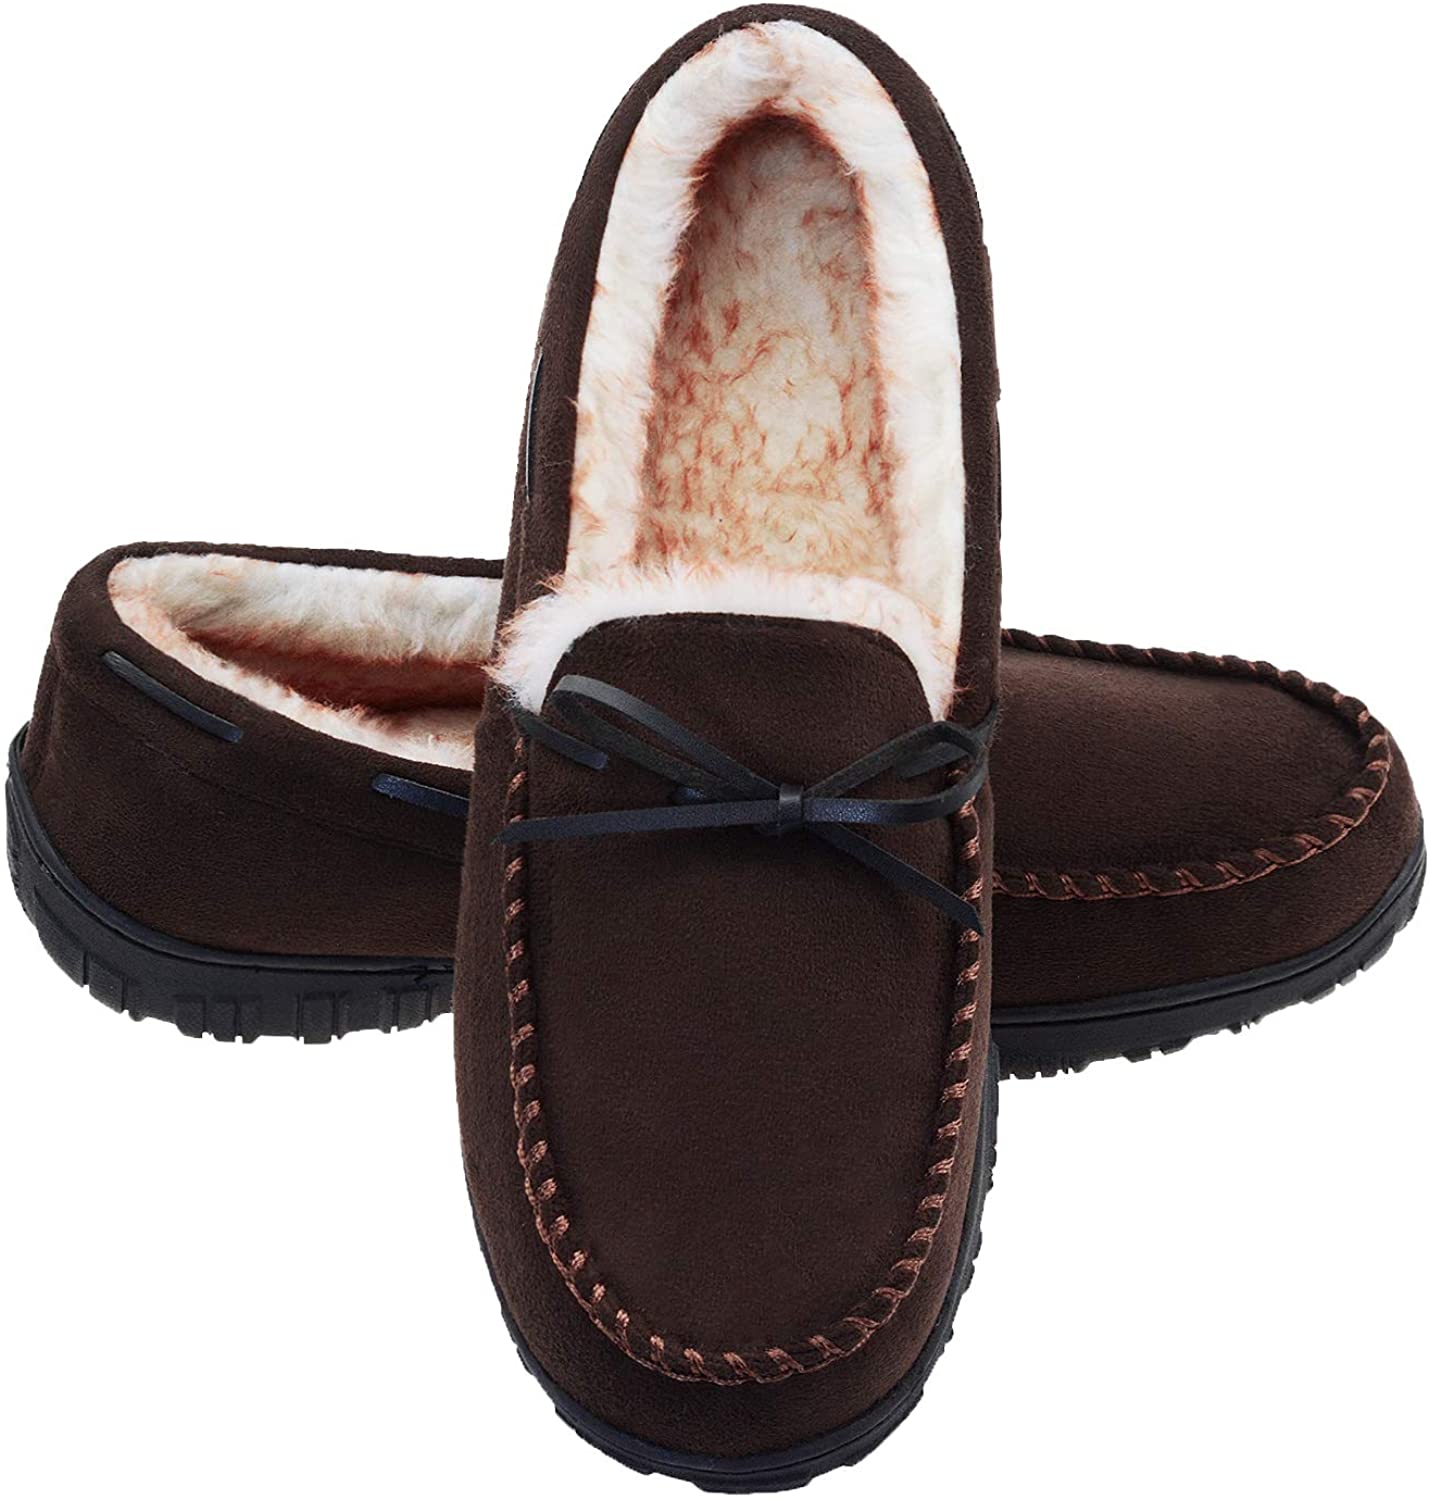 LA PLAGE Mens Slippers Moccasins for Mens Indoor Outdoor Bedroom Slippers Microsuede Slip On House Shoes 